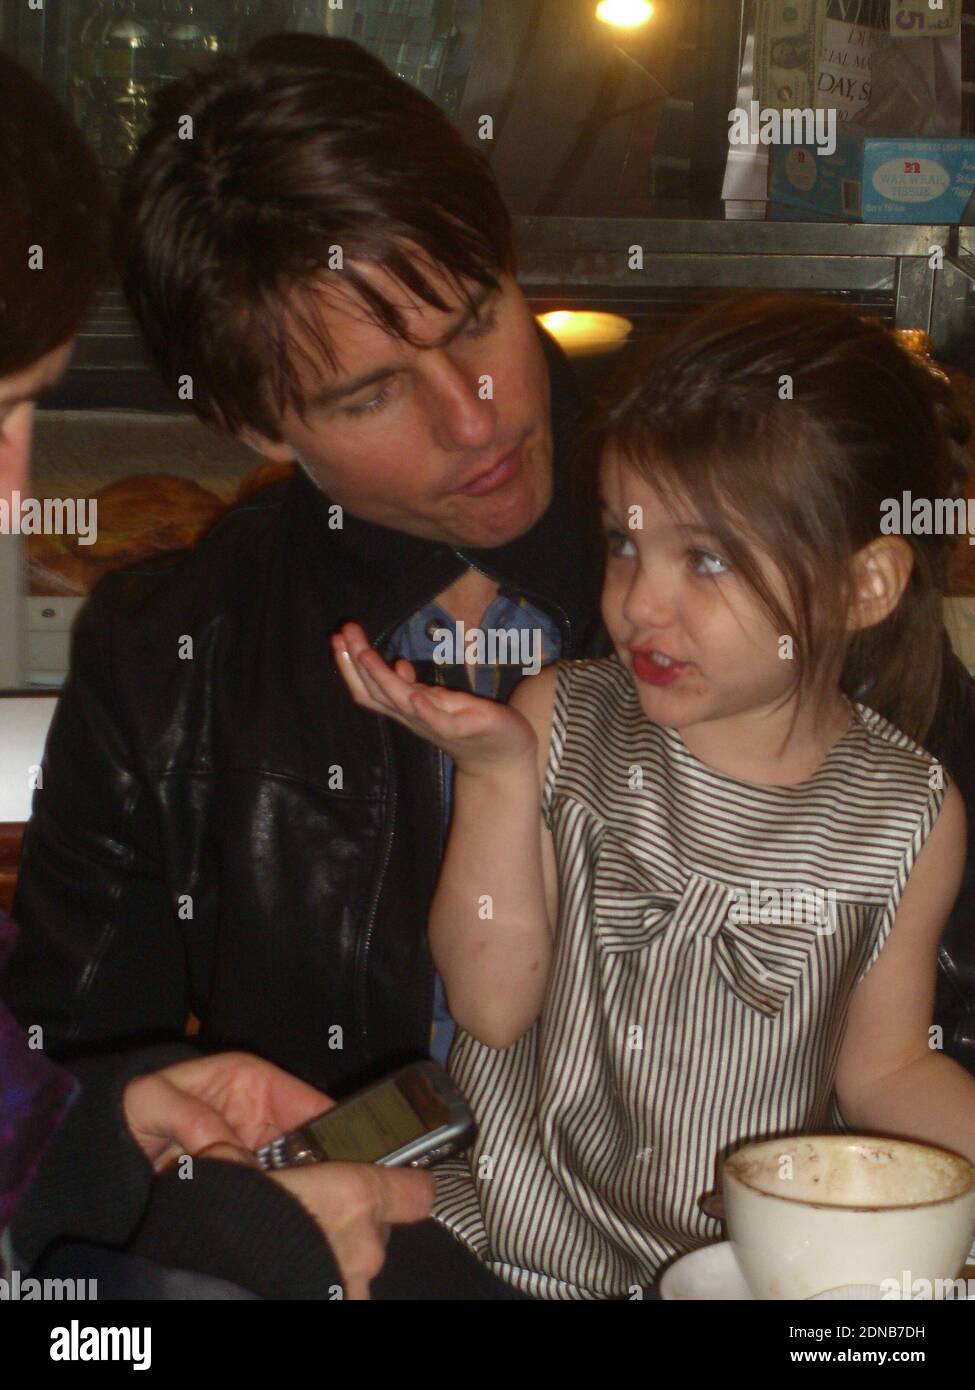 Boston, United States Of America. 07th Nov, 2009. BOSTON, MA - NOVEMBER 07: (EXCLUSIVE COVERAGE) Tom Cruise, daughter Suri, along with son Connor and wife Katie Holmes go out to a small cafe on the west side. The crusie family had a blast as the family enjoyed cafe and cake. Little Suri looked ablsolutely adorable as she played and picked at her dersert. Tom is in Boston filming his new movie 'Wichita' alongside Cameron Diaz. on November 07, 2009 in Boston, Massachusetts People: Tom Cruise, Suri Cruise Credit: Storms Media Group/Alamy Live News Stock Photo